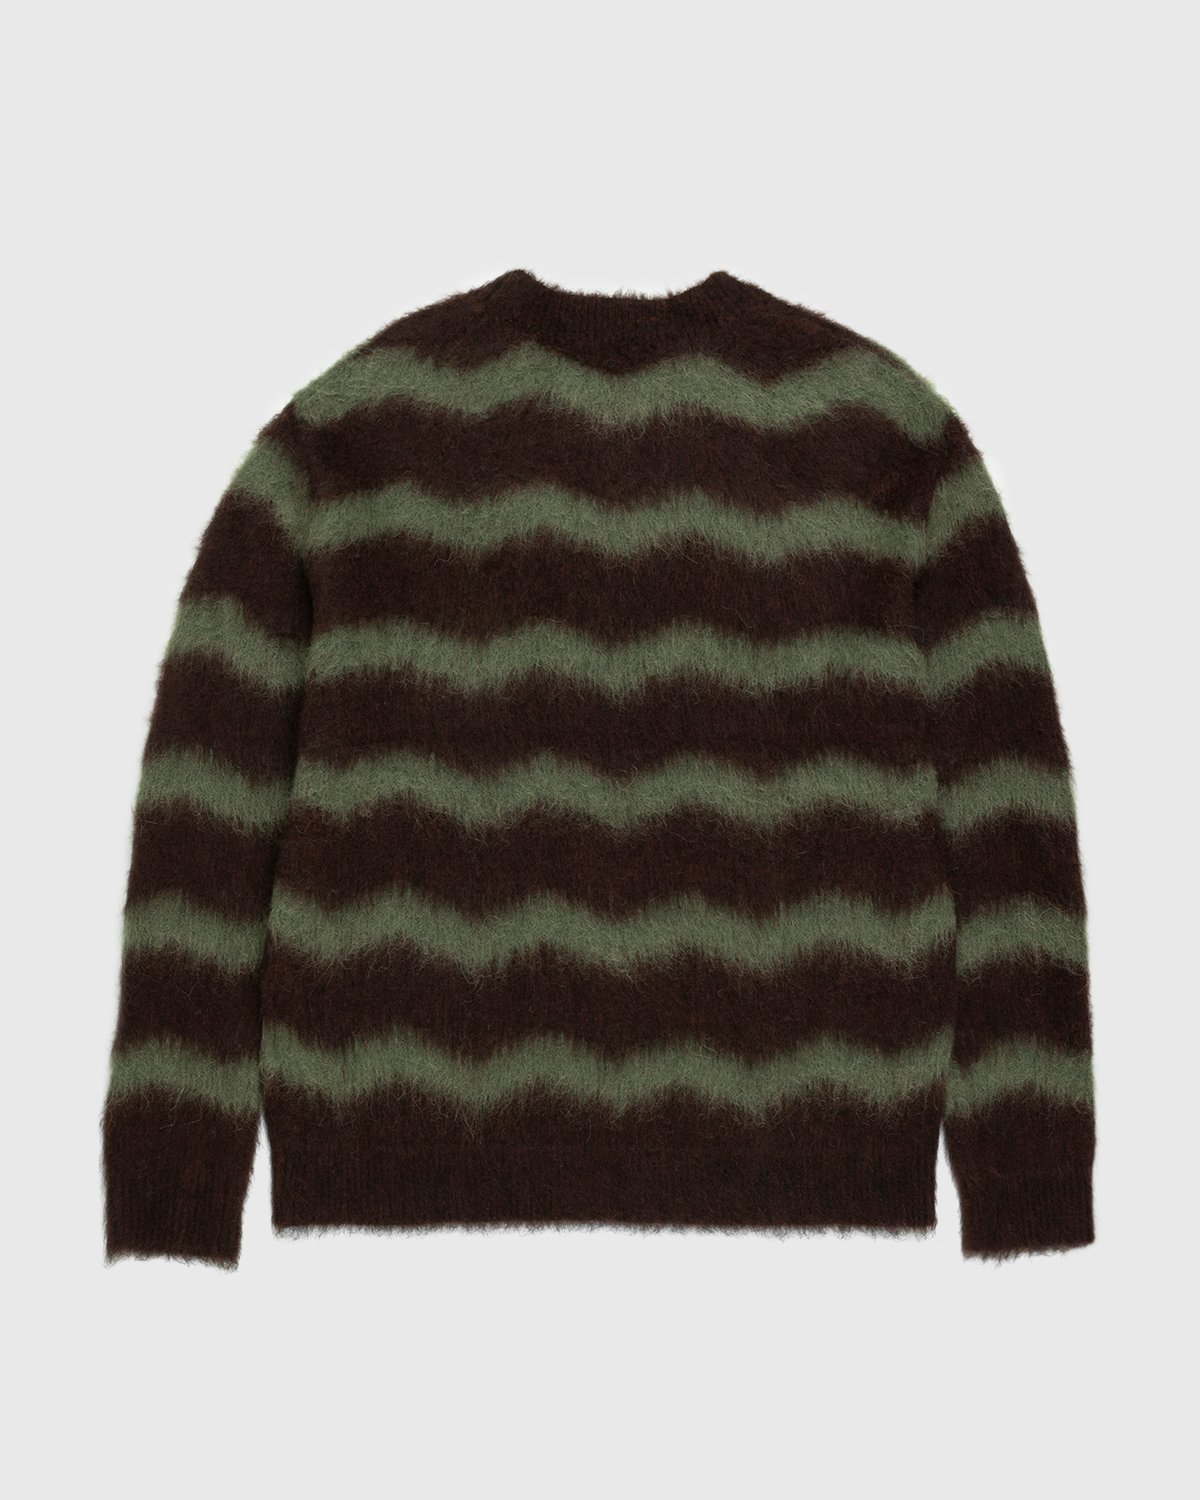 Acne Studios - Striped Fuzzy Sweater Brown/Military Green - Clothing - Brown - Image 2